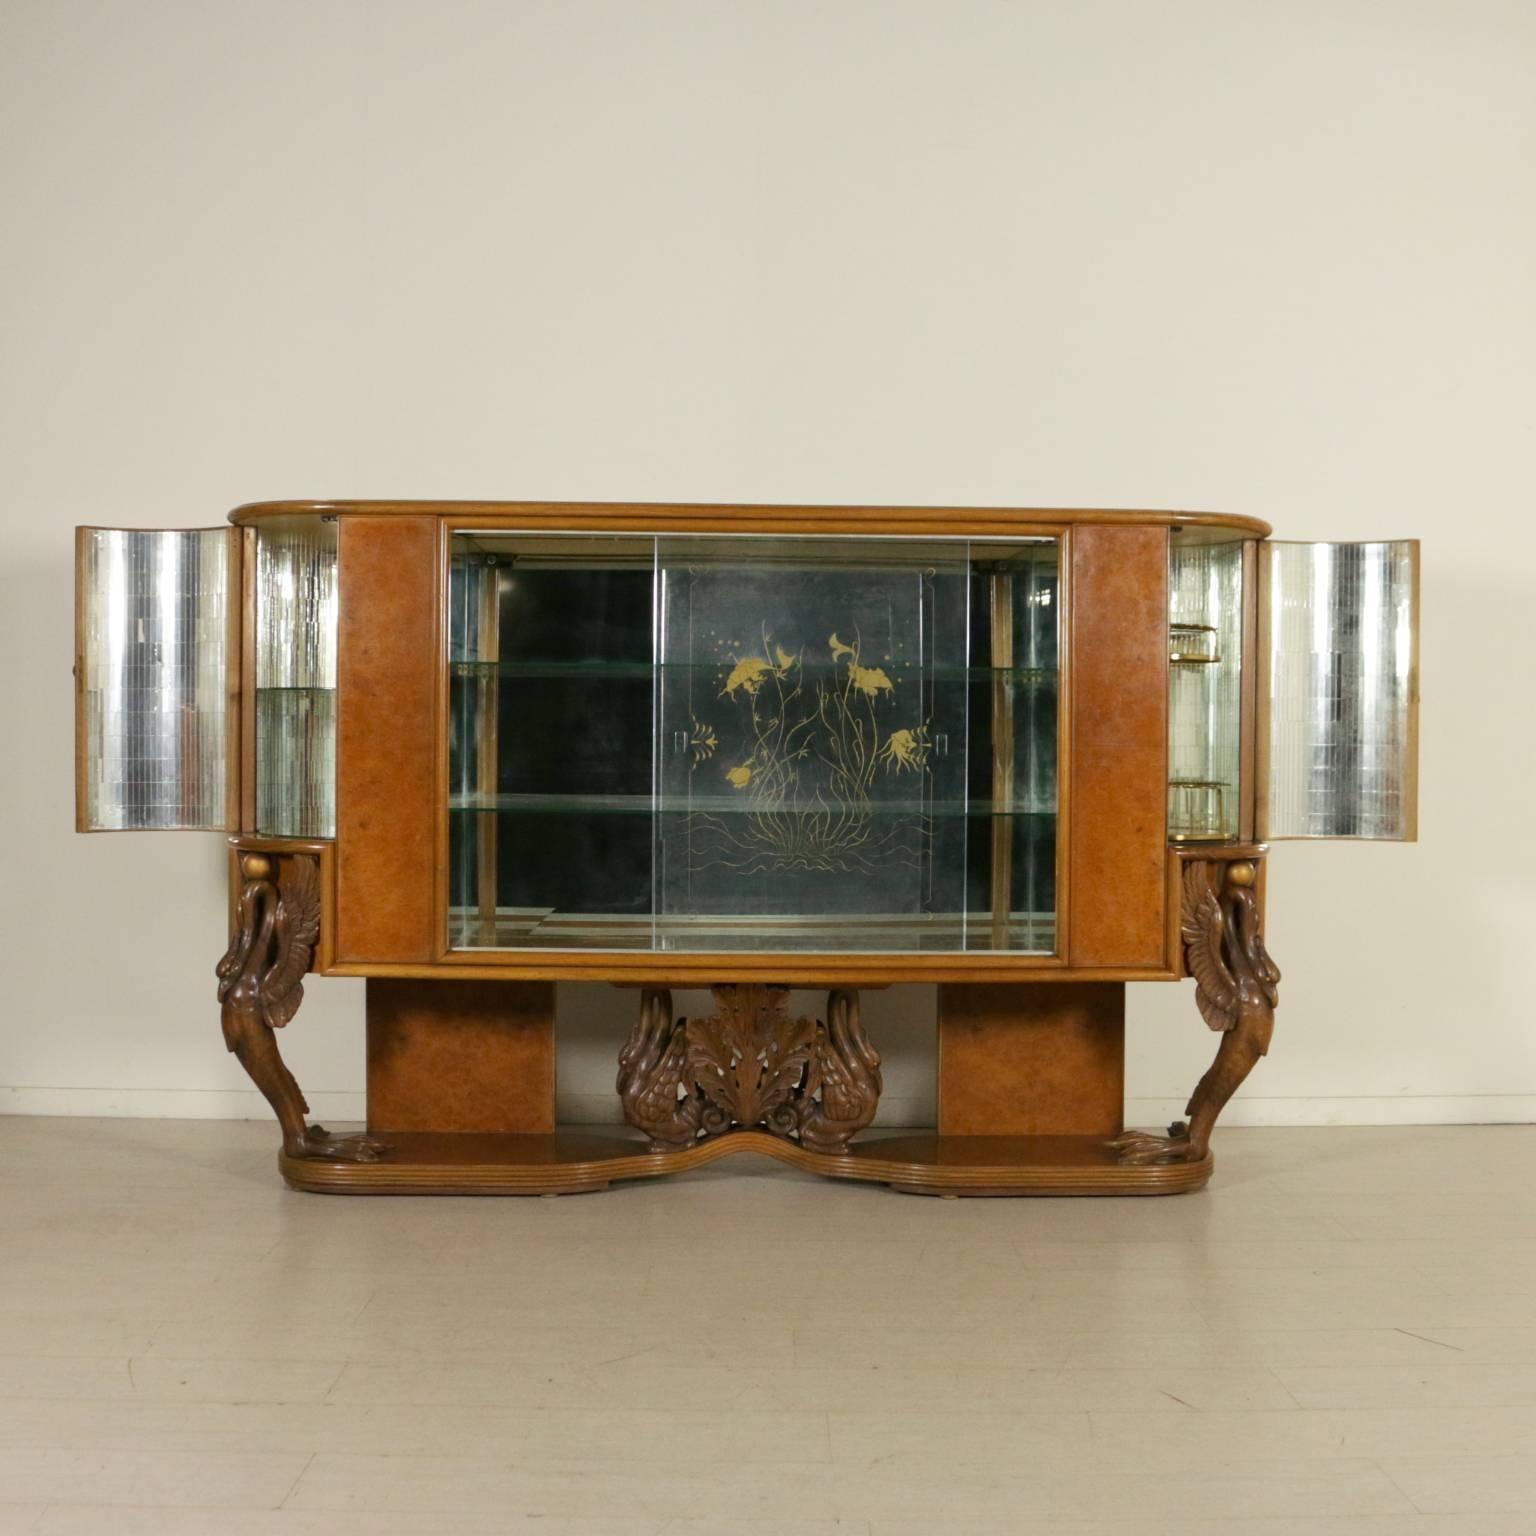 A showcase with decorated glass sliding doors, bar side compartments with bent doors. Burl veneer, carved wooden legs, brass handles. Manufactured in Italy, 1940s.